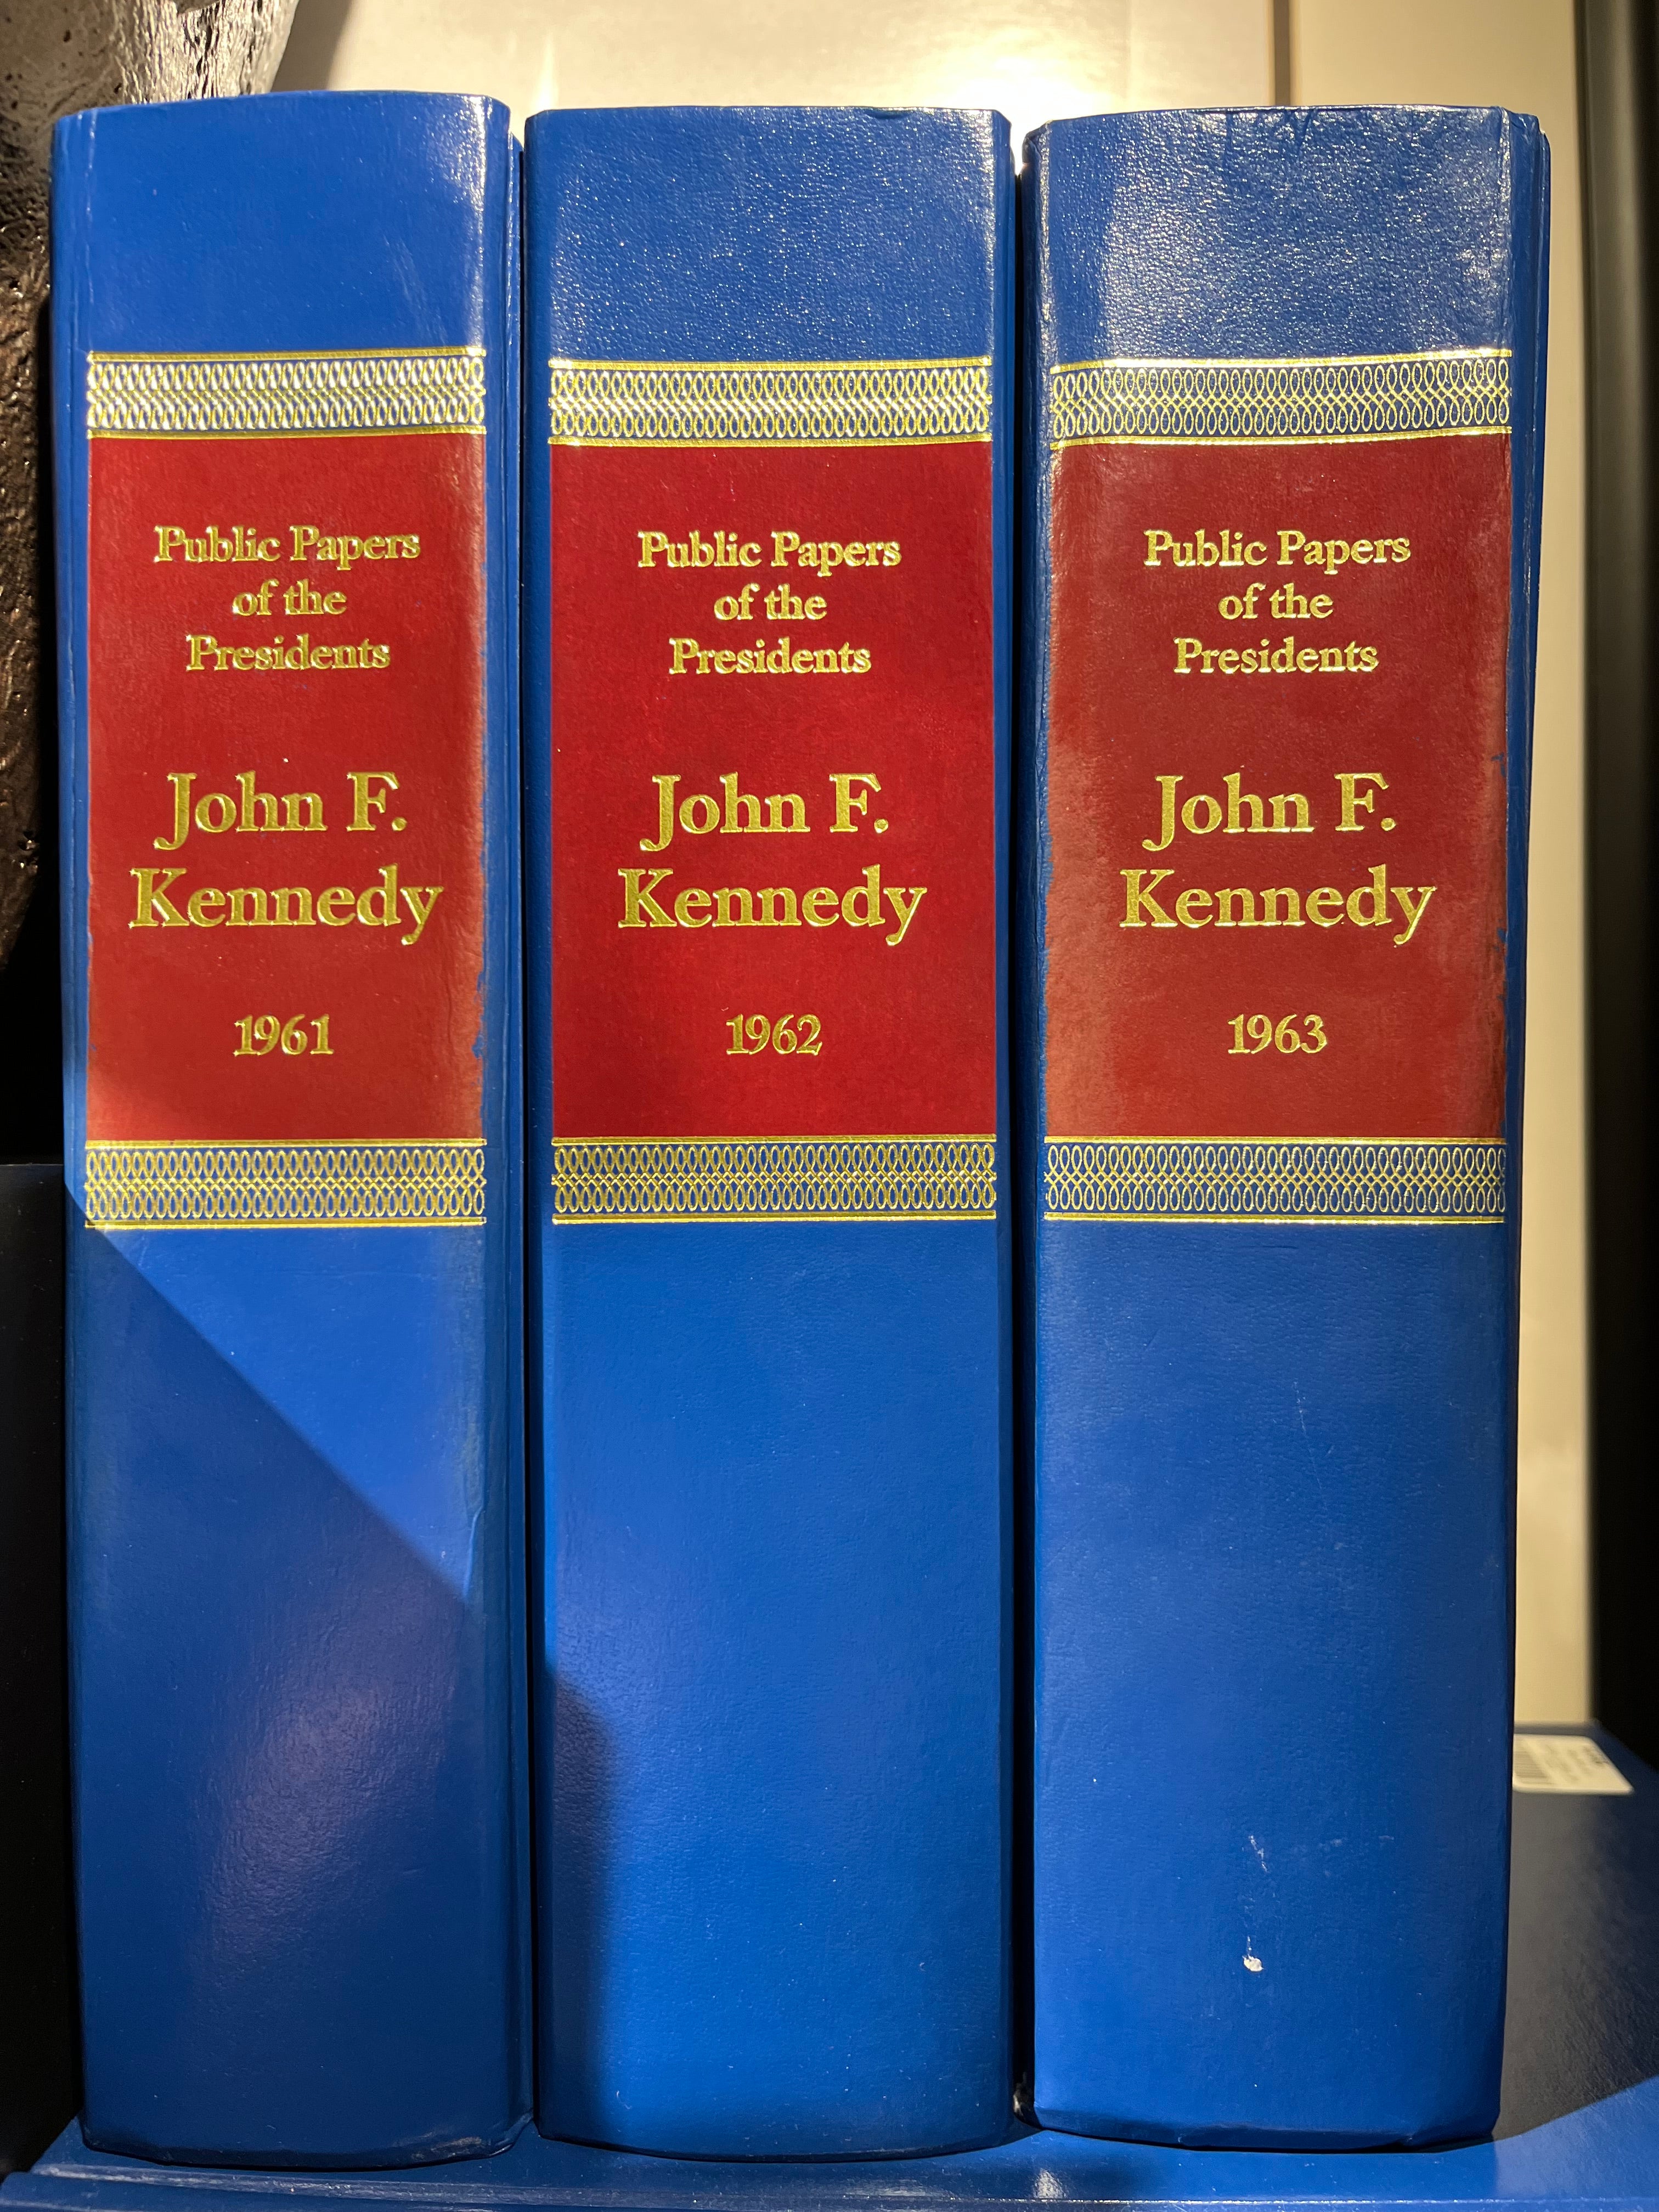 Public Papers of the Presidents of the United States: John F. Kennedy